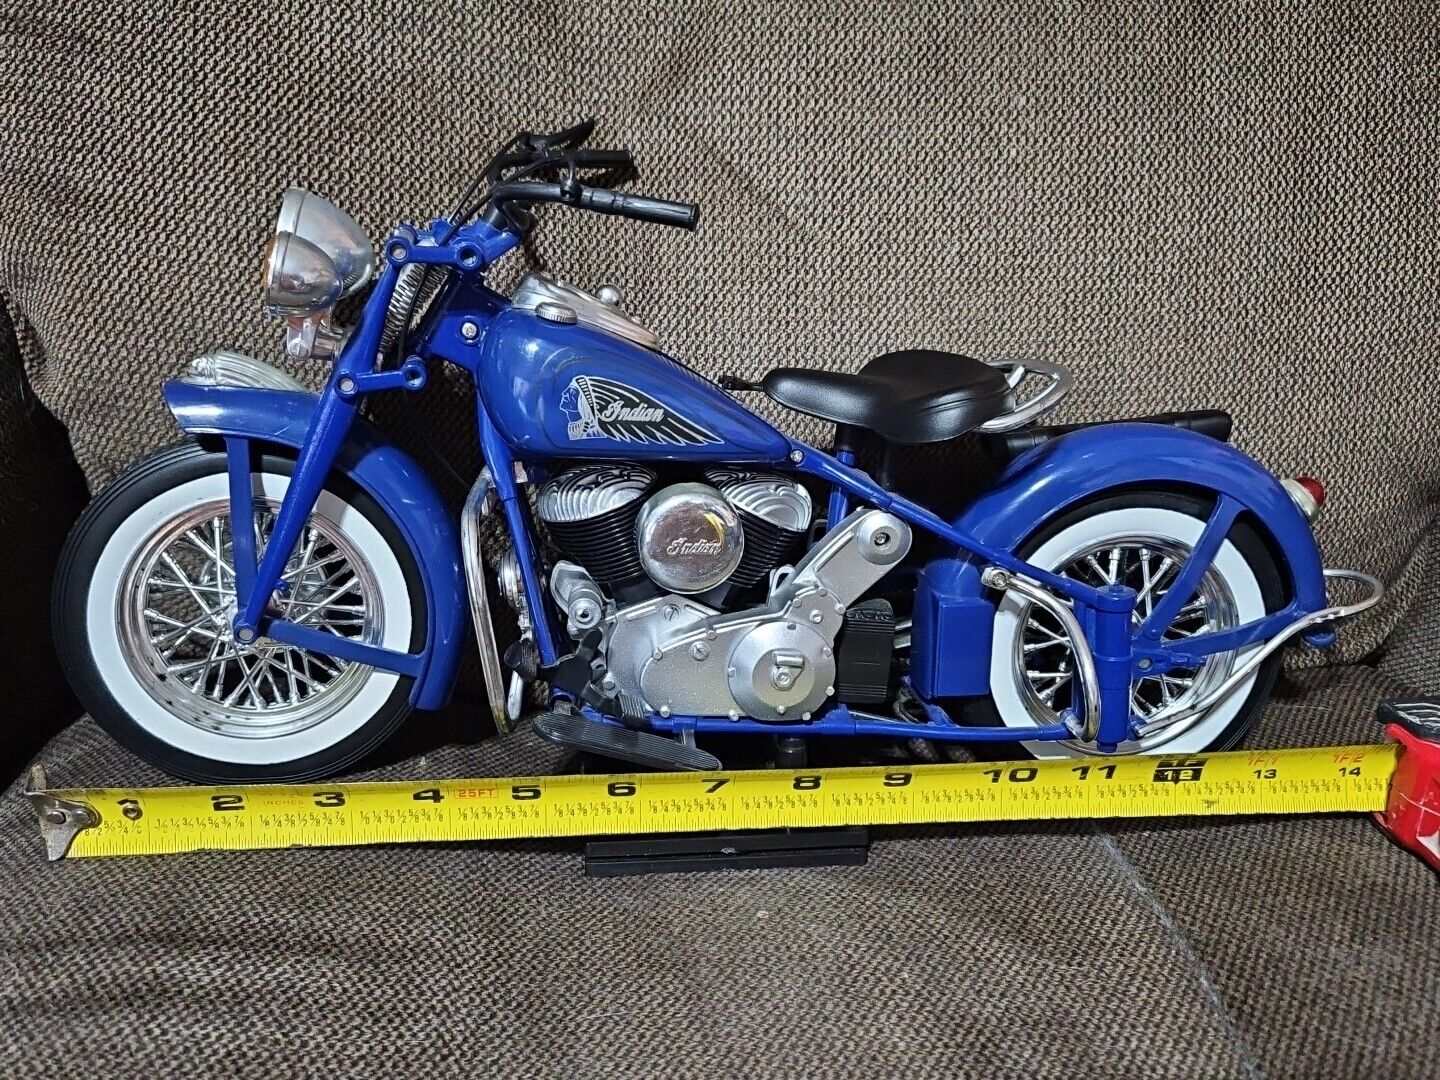 Indian Chief IMMI 1998 Model (Blue Motorcycle)